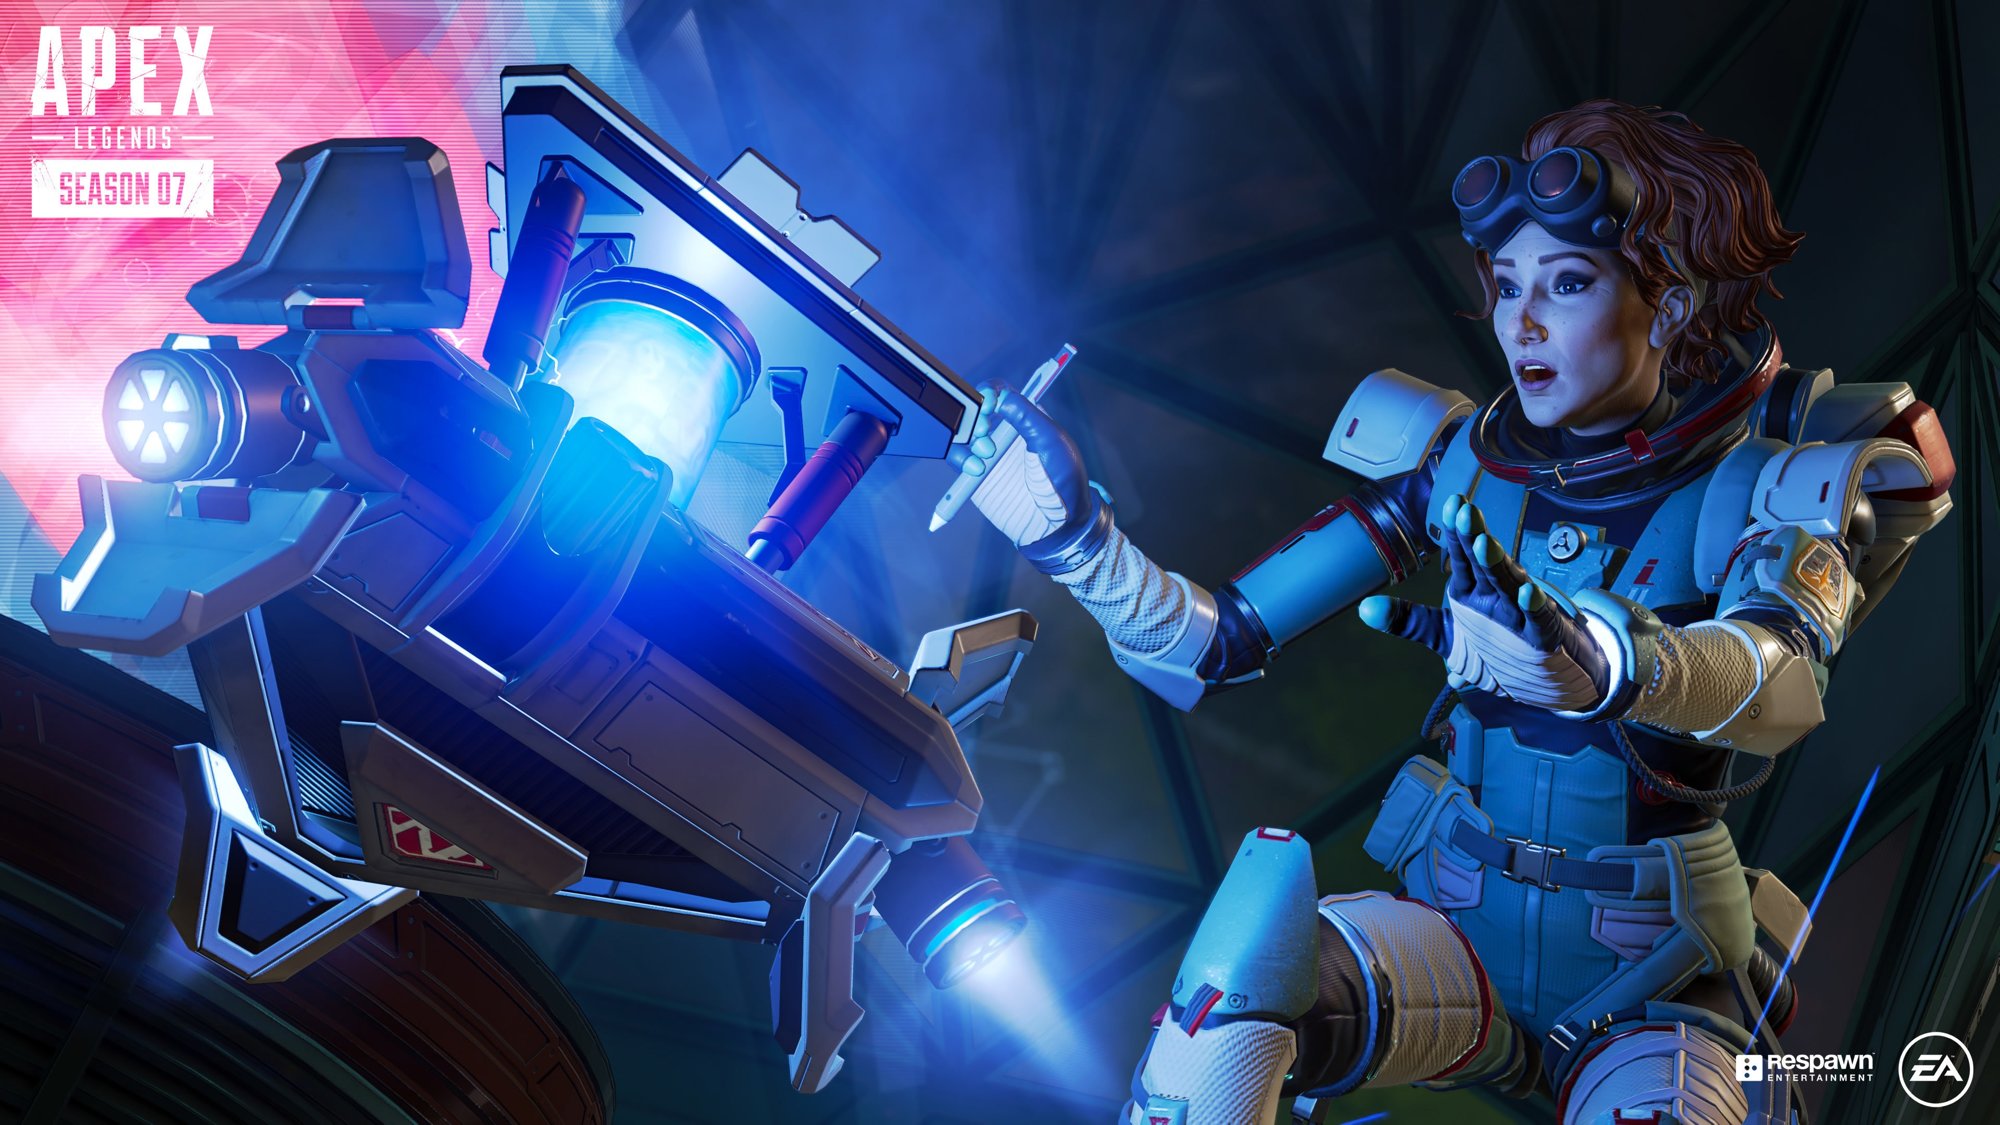 Apex Legends breaks its Steam record, peaking at 511k concurrent